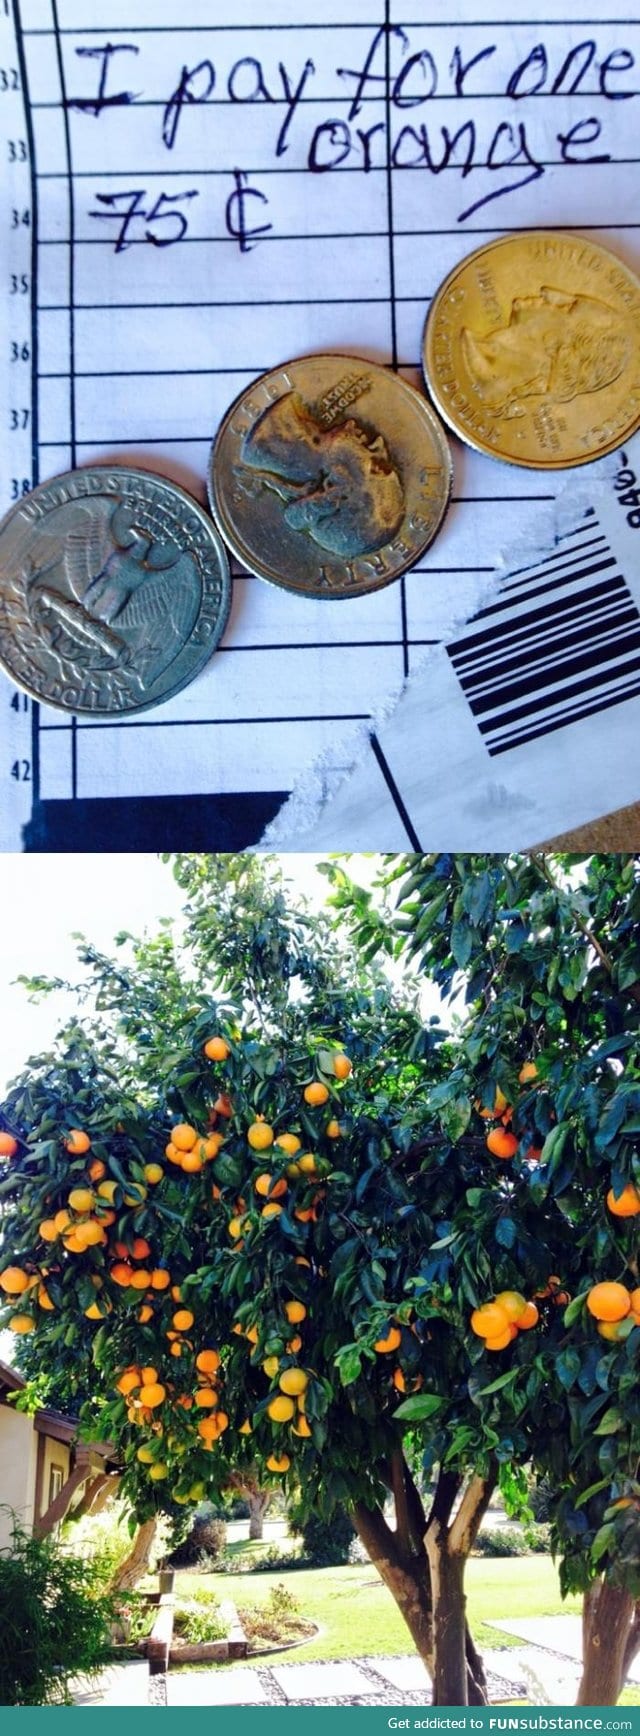 UPS Guy left 75 cents after picking an orange from the front yard